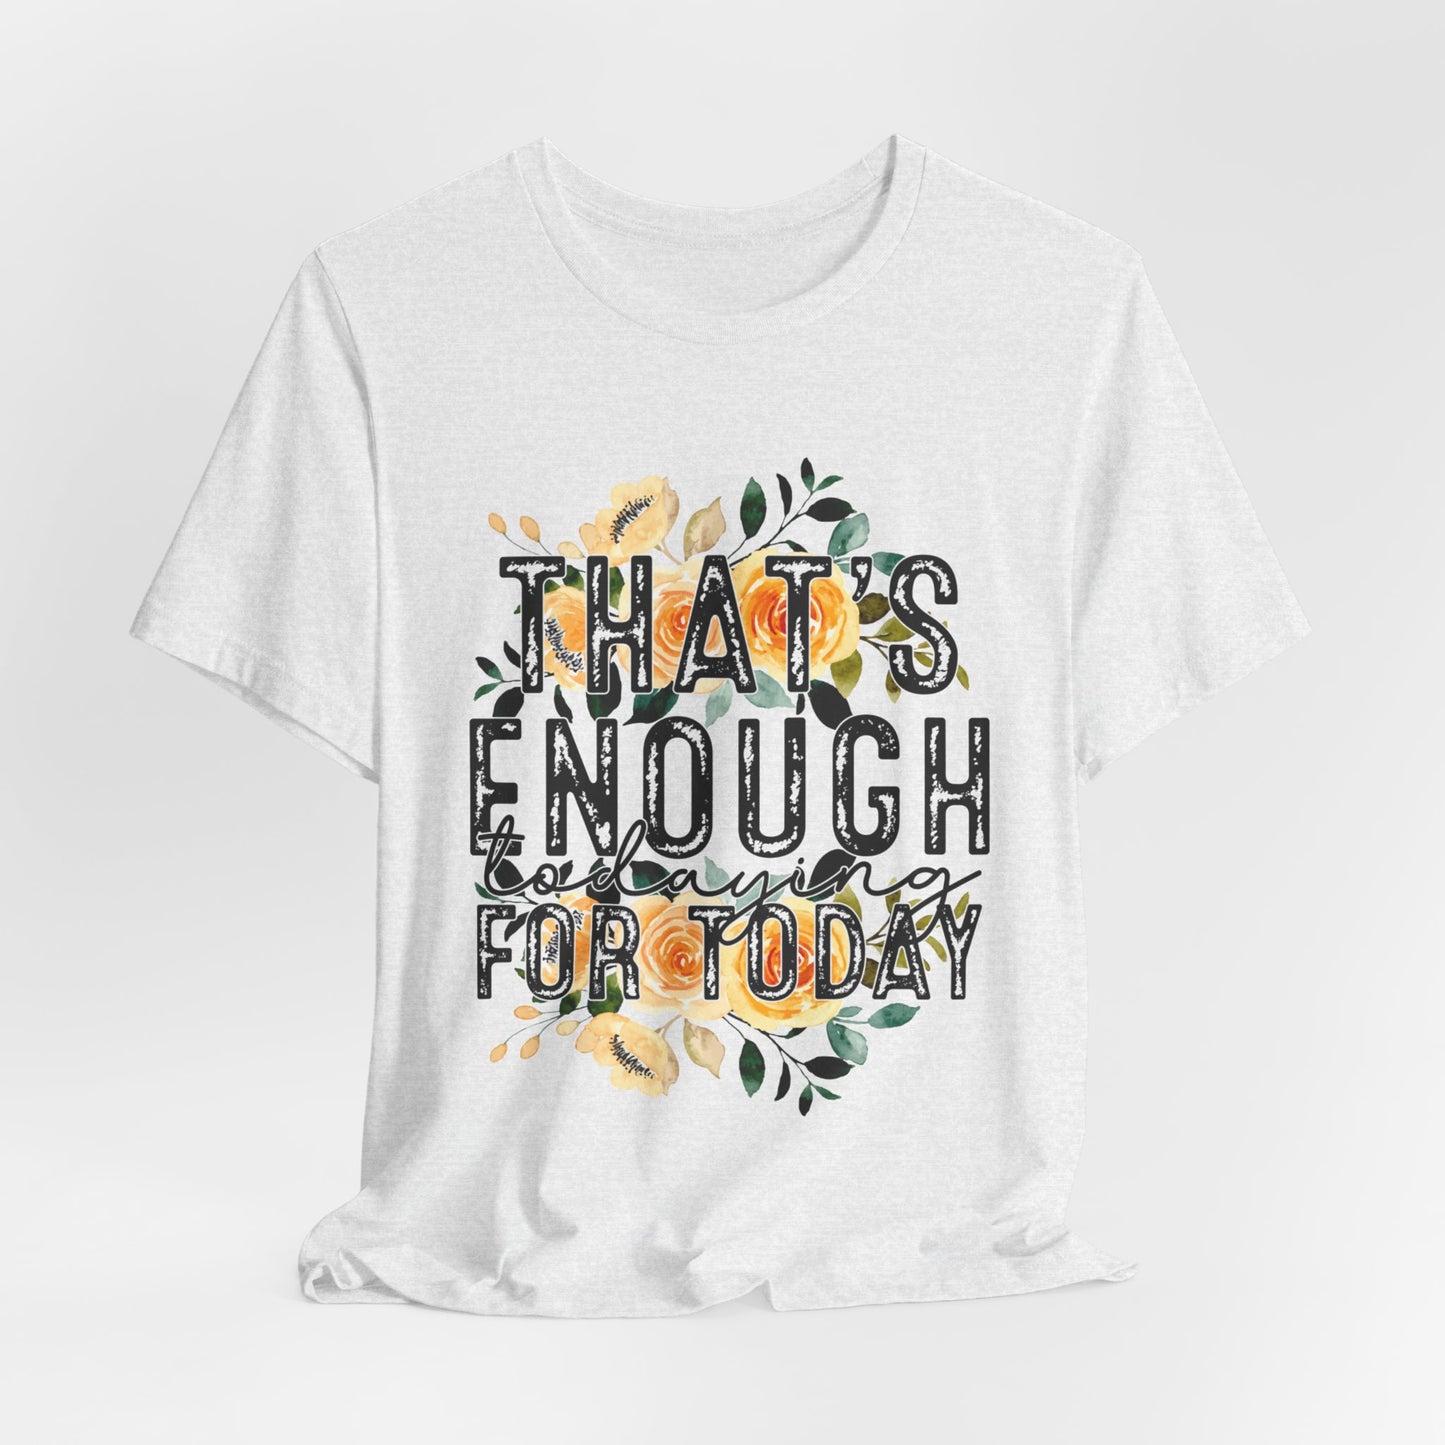 Enough For Today Women's Funny Short Sleeve Tshirt